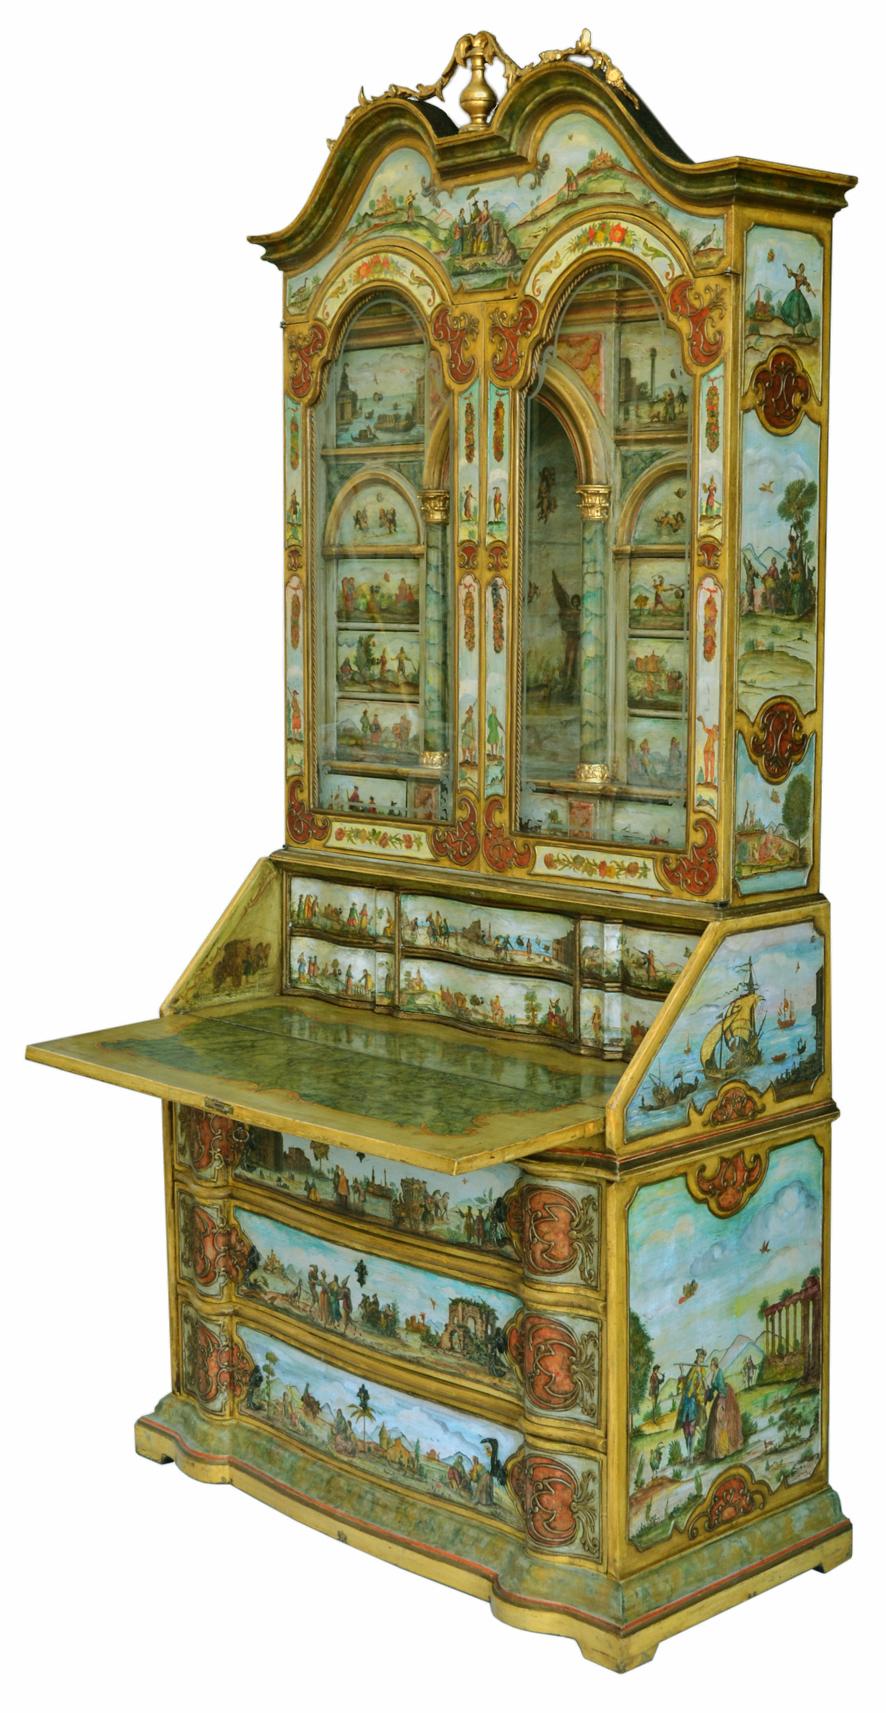 This Trumeau has been handmade using the technique of Venetian art.
In the 18th century in Venice the fashion of lacquering spread. Using small prints, cut out and then glued on the wood, then handpainted and lacquered at the end. The finishing was